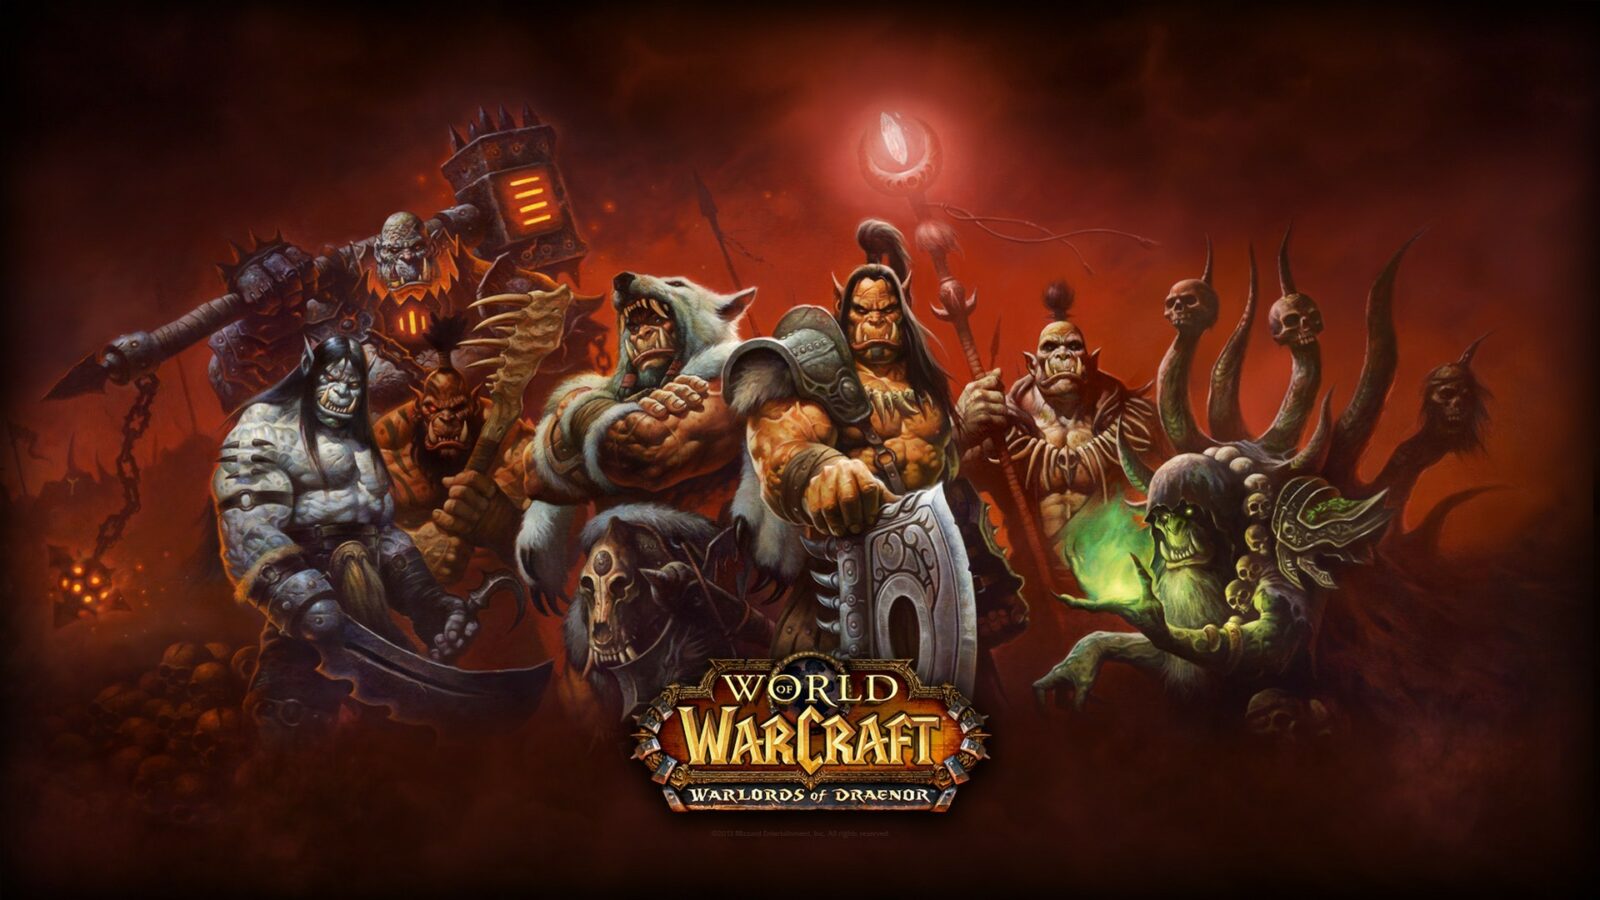 www.GetBg .net Games Characters in the game World of Warcraft Warlords of Draenor 109116